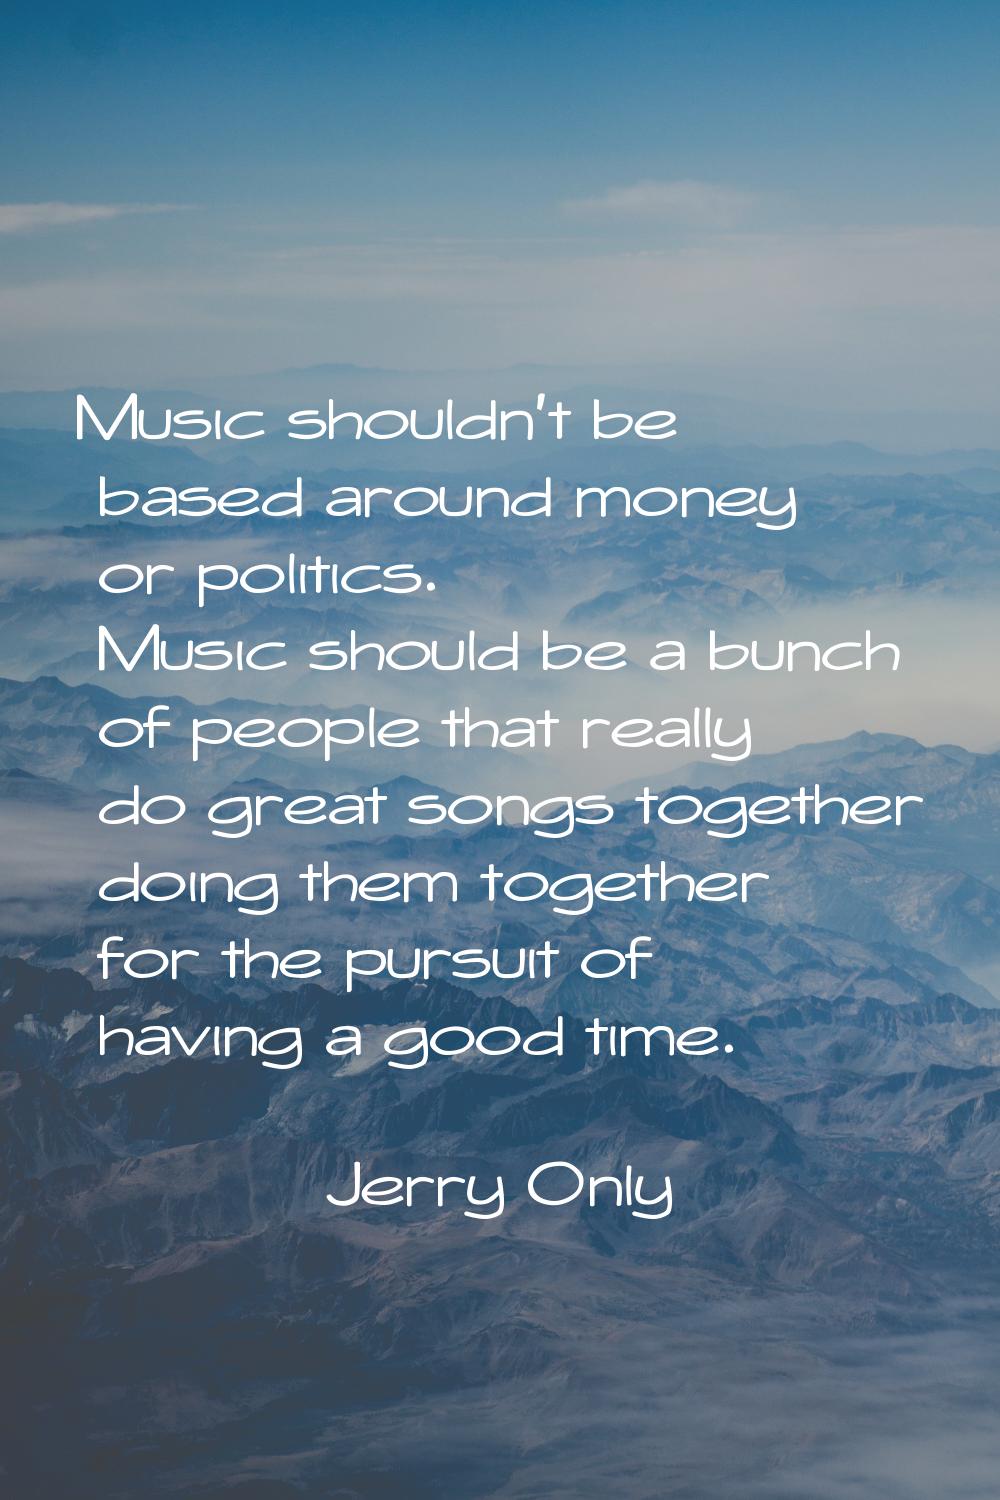 Music shouldn't be based around money or politics. Music should be a bunch of people that really do